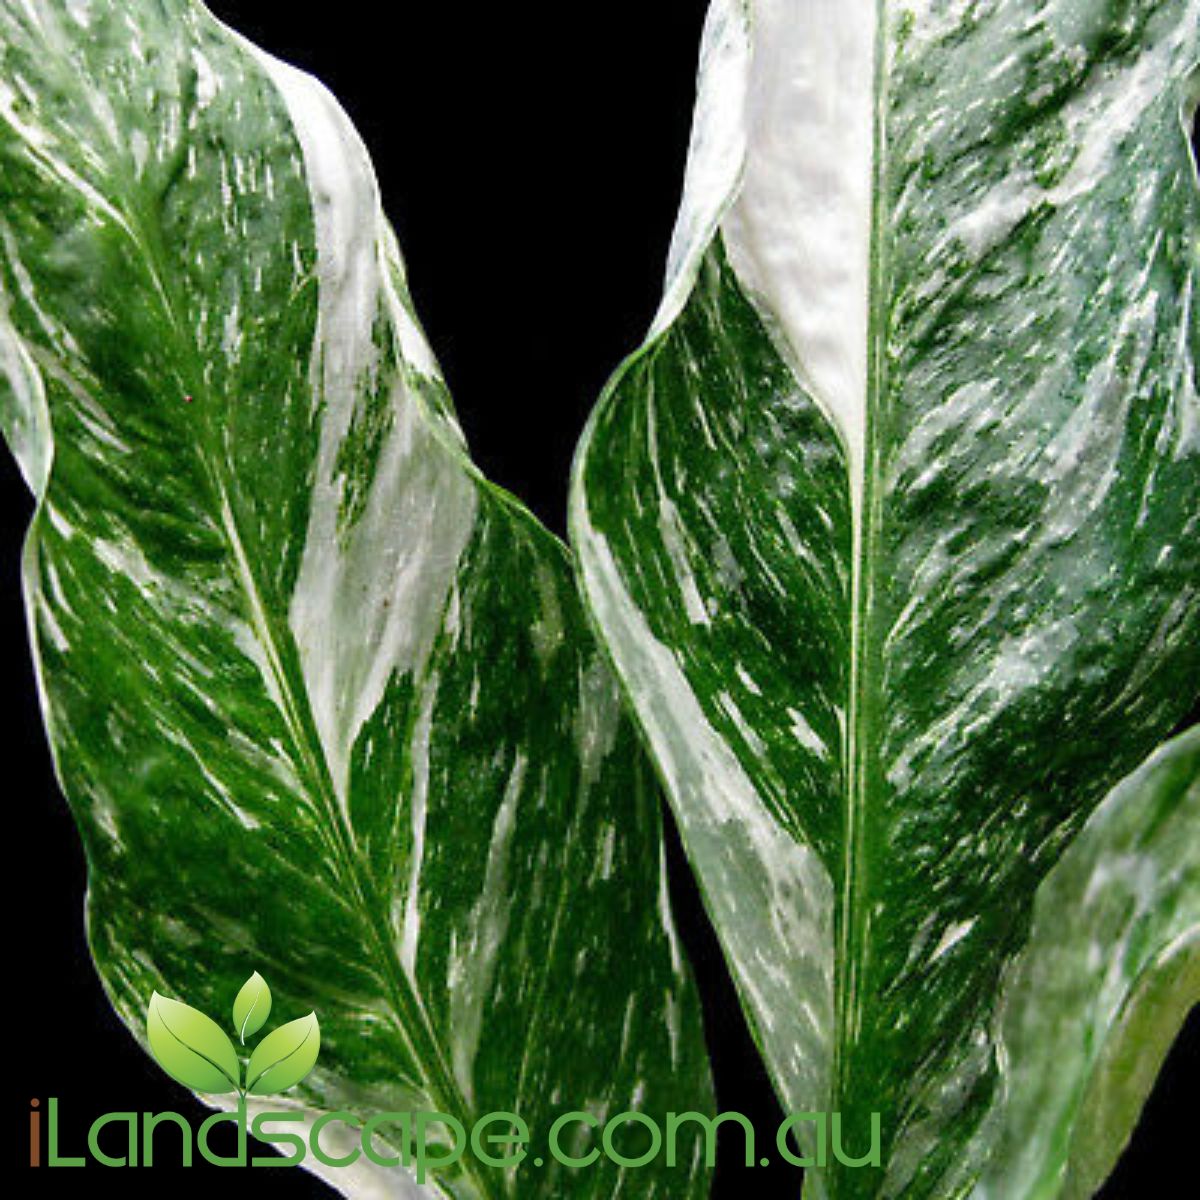 Spathiphyllum Domino is a variegated form of the plant commonly known as the Peace Lilly and is a hardy deep green leaf with white speckles and sometimes sections of white with white flower spikes. This plant will cope in a lower light area as well as dappled sun and morning sun position.